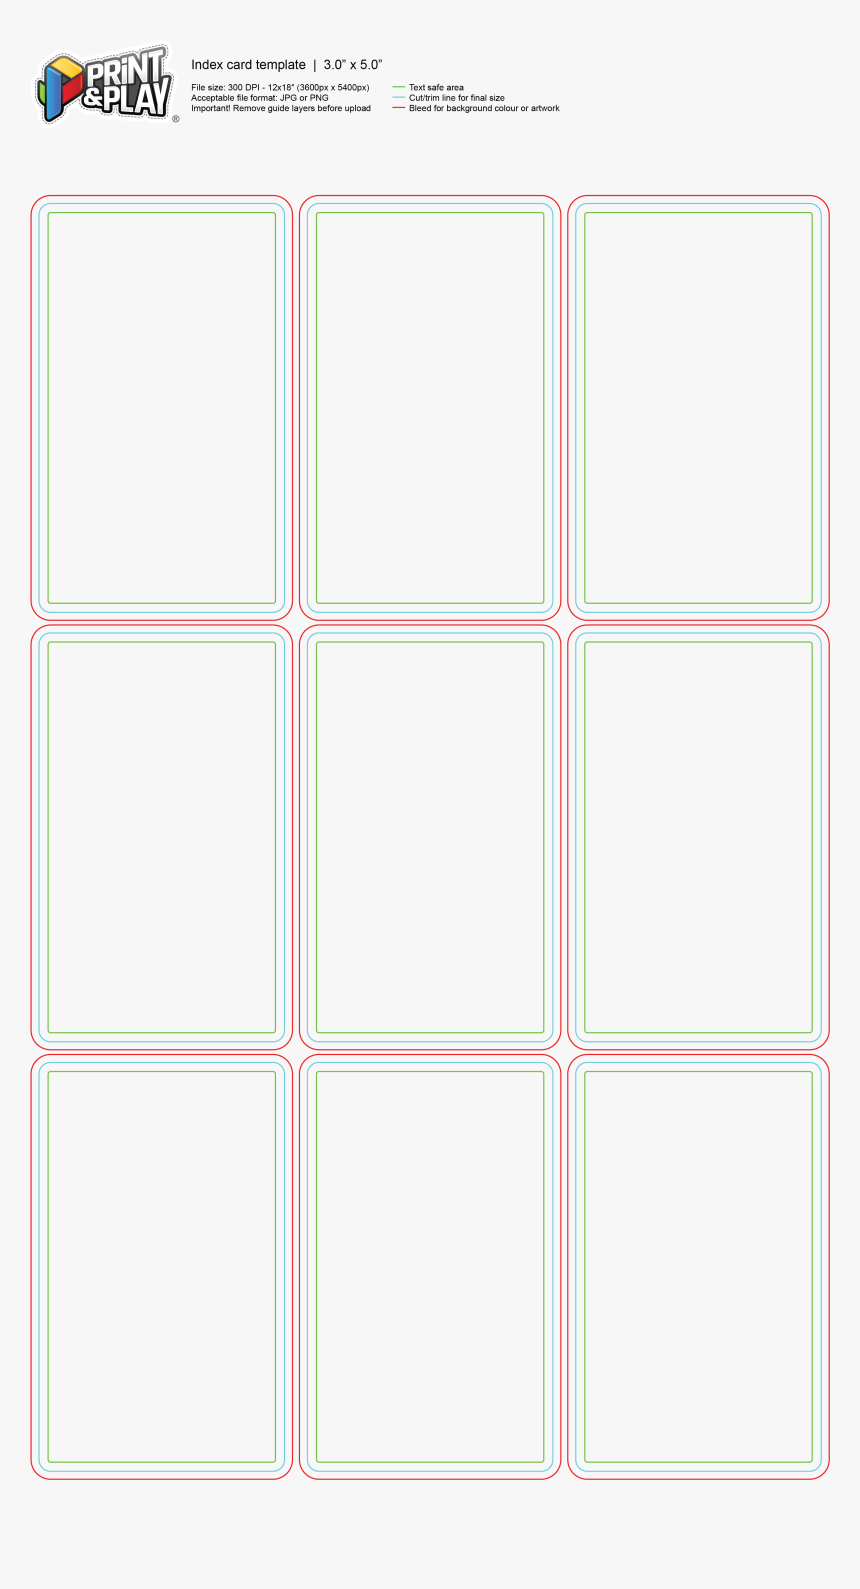 Standard Indecard Index Card Template 3X5 Free Format Google For Index Card Template For Pages